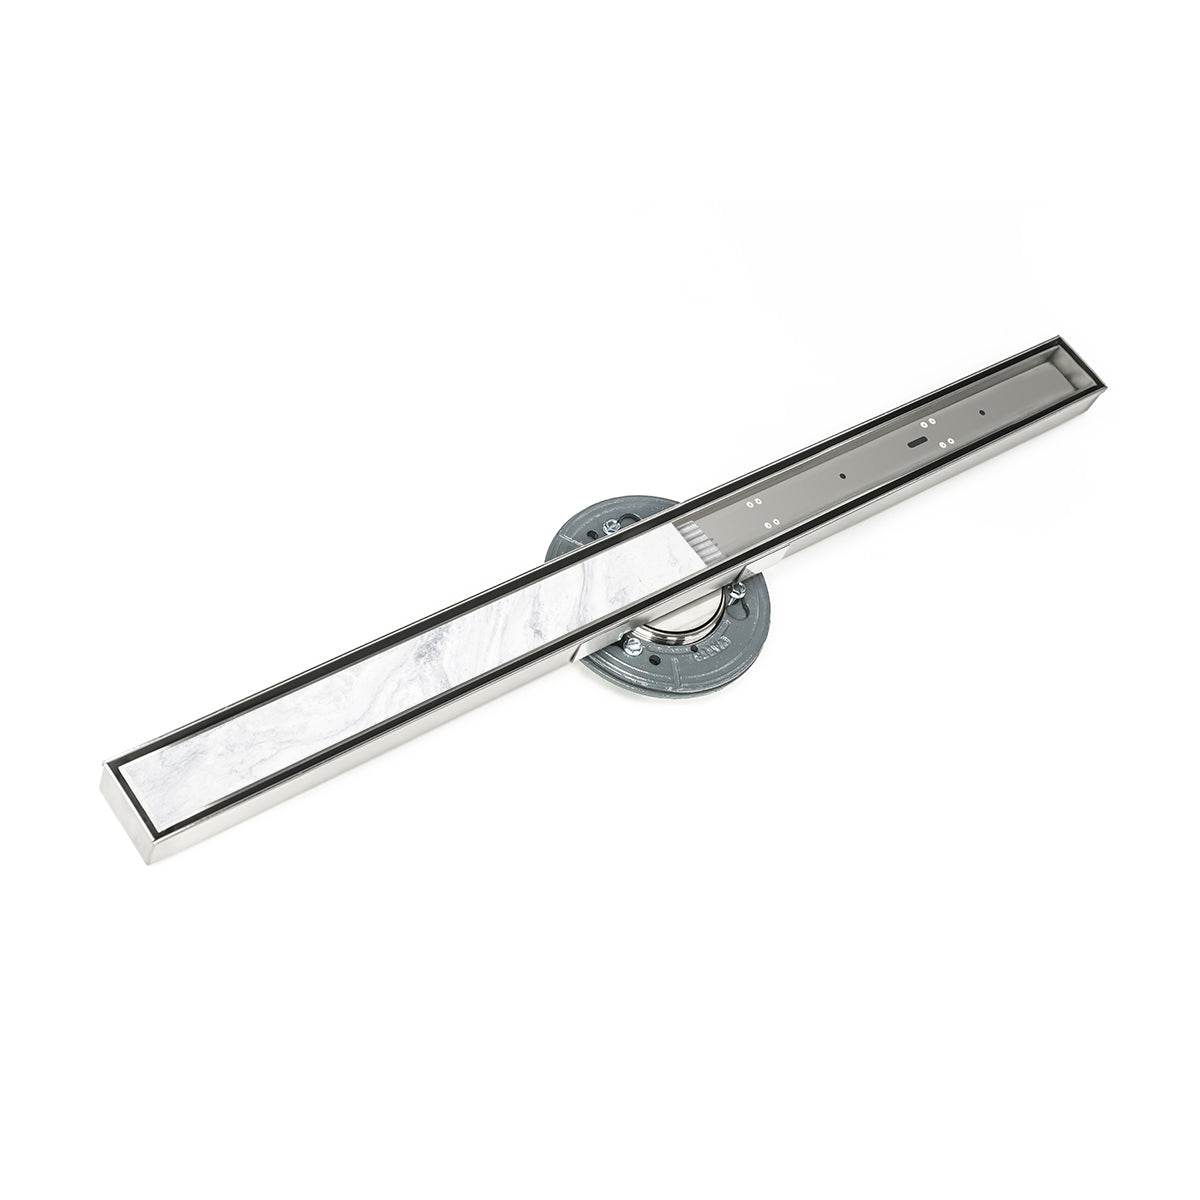 Infinity Drain 96" S-Stainless Steel Series High Flow Site Sizable Linear Drain Kit with Tile Insert Frame with PVC Drain Body, 3" Outlet